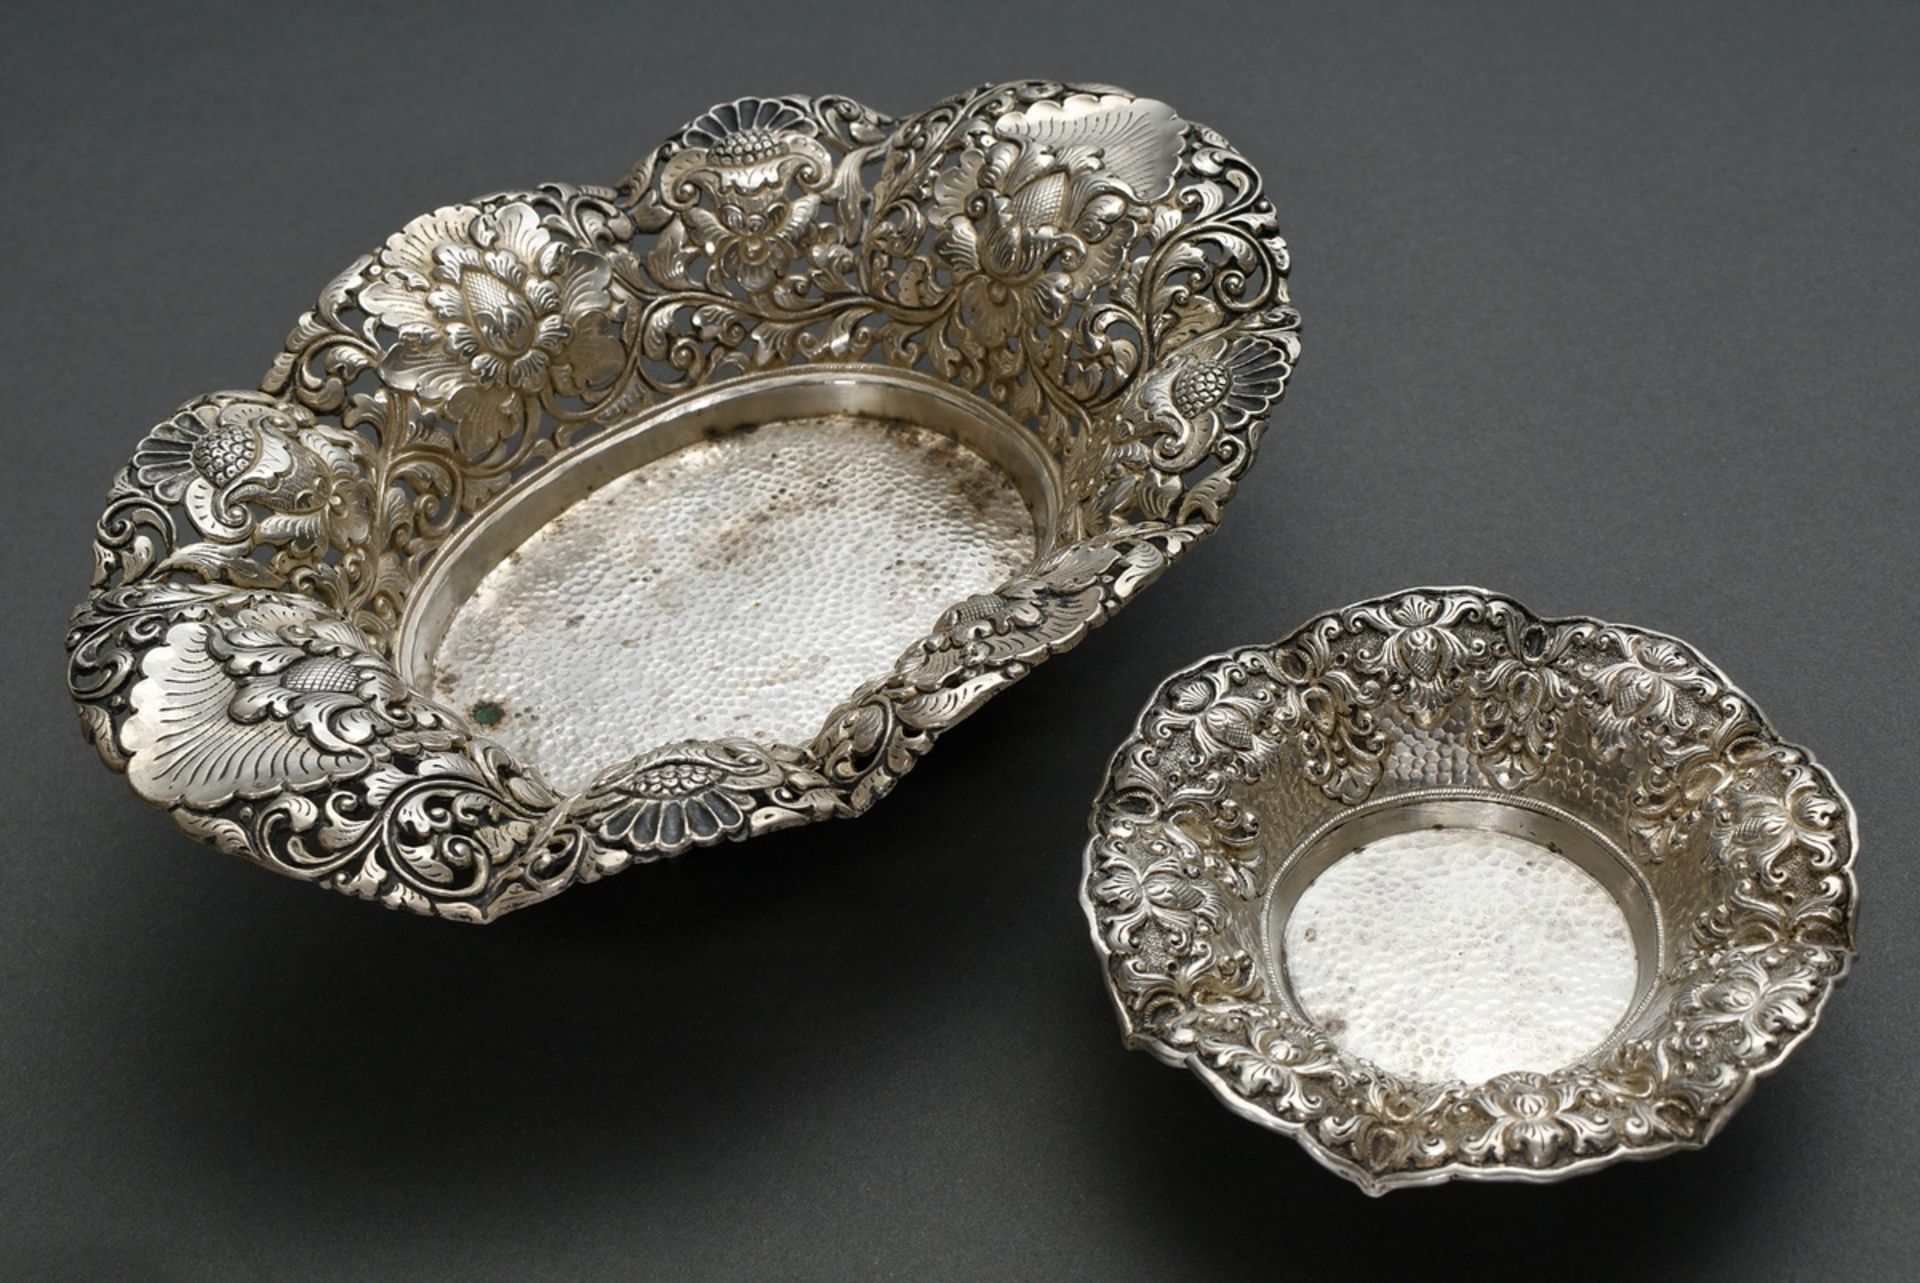 2 various small bowls with floral decor on ball feet, Java, silver, 192g, Ø 10cm, 20x13.5cm, signs  - Image 7 of 7